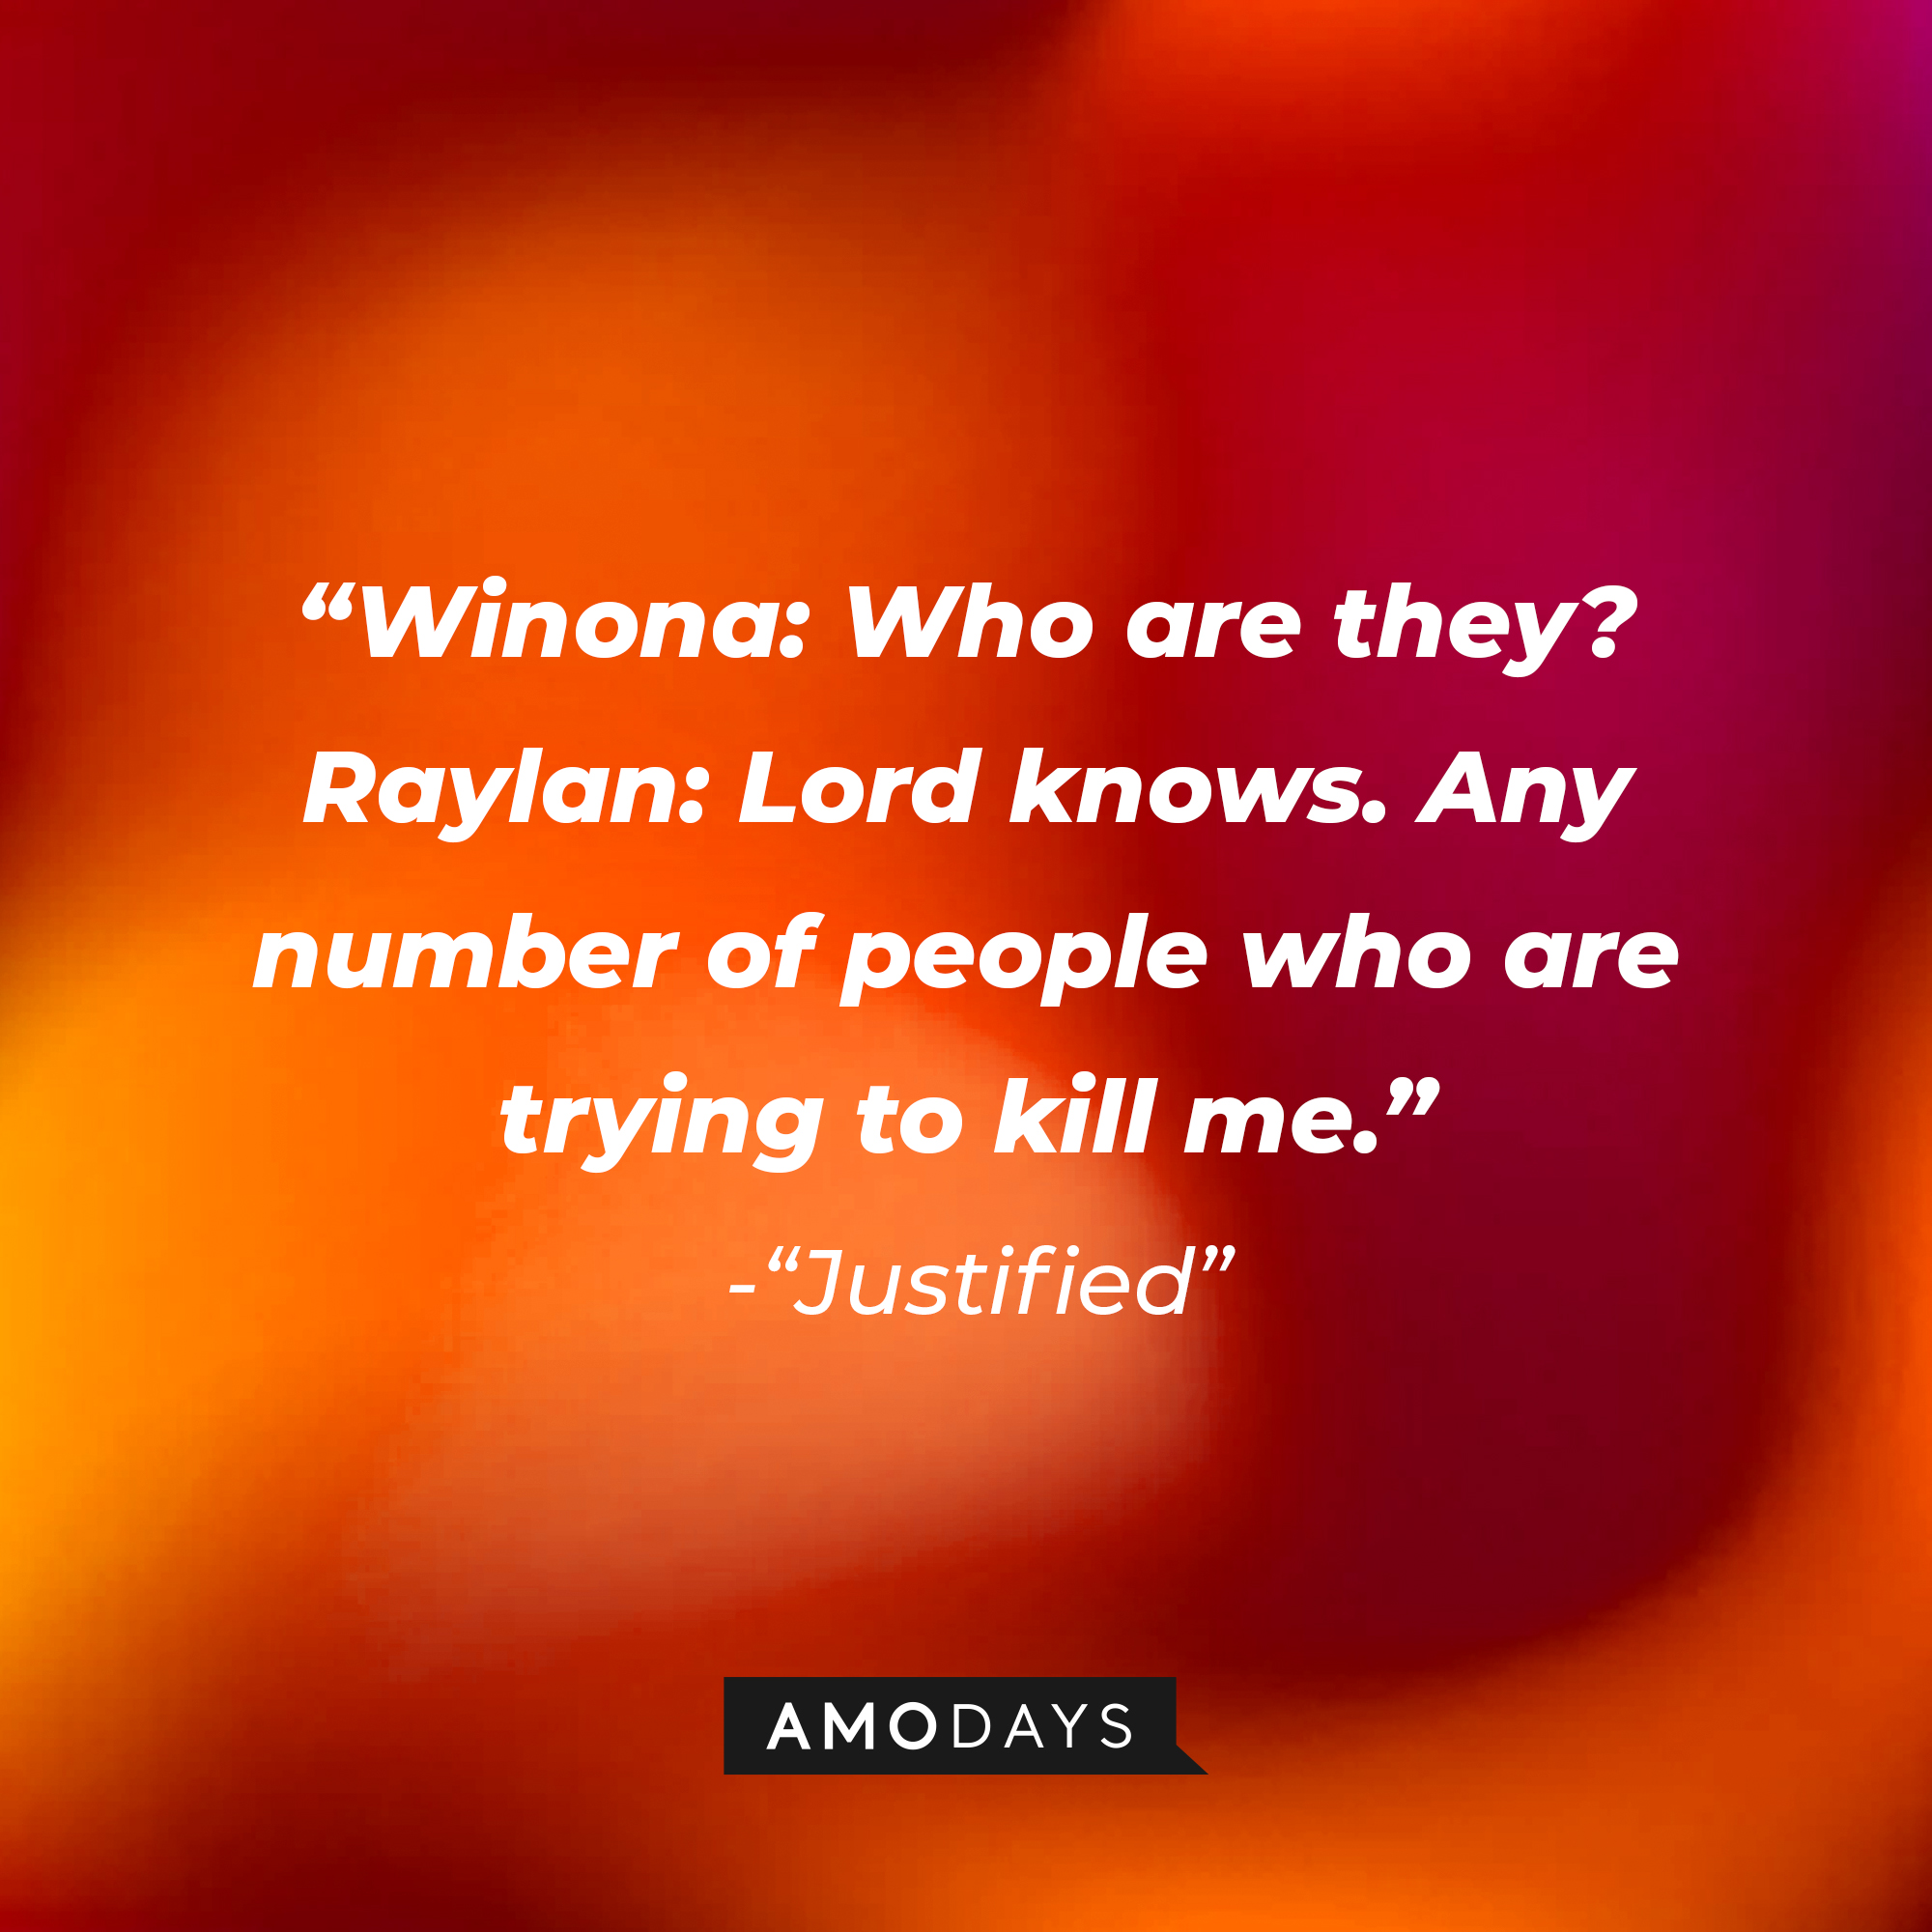 Quote from “Justified”: “Winona: Who are they? Raylan: Lord knows. Any number of people who are trying to kill me.” | Source: AmoDays